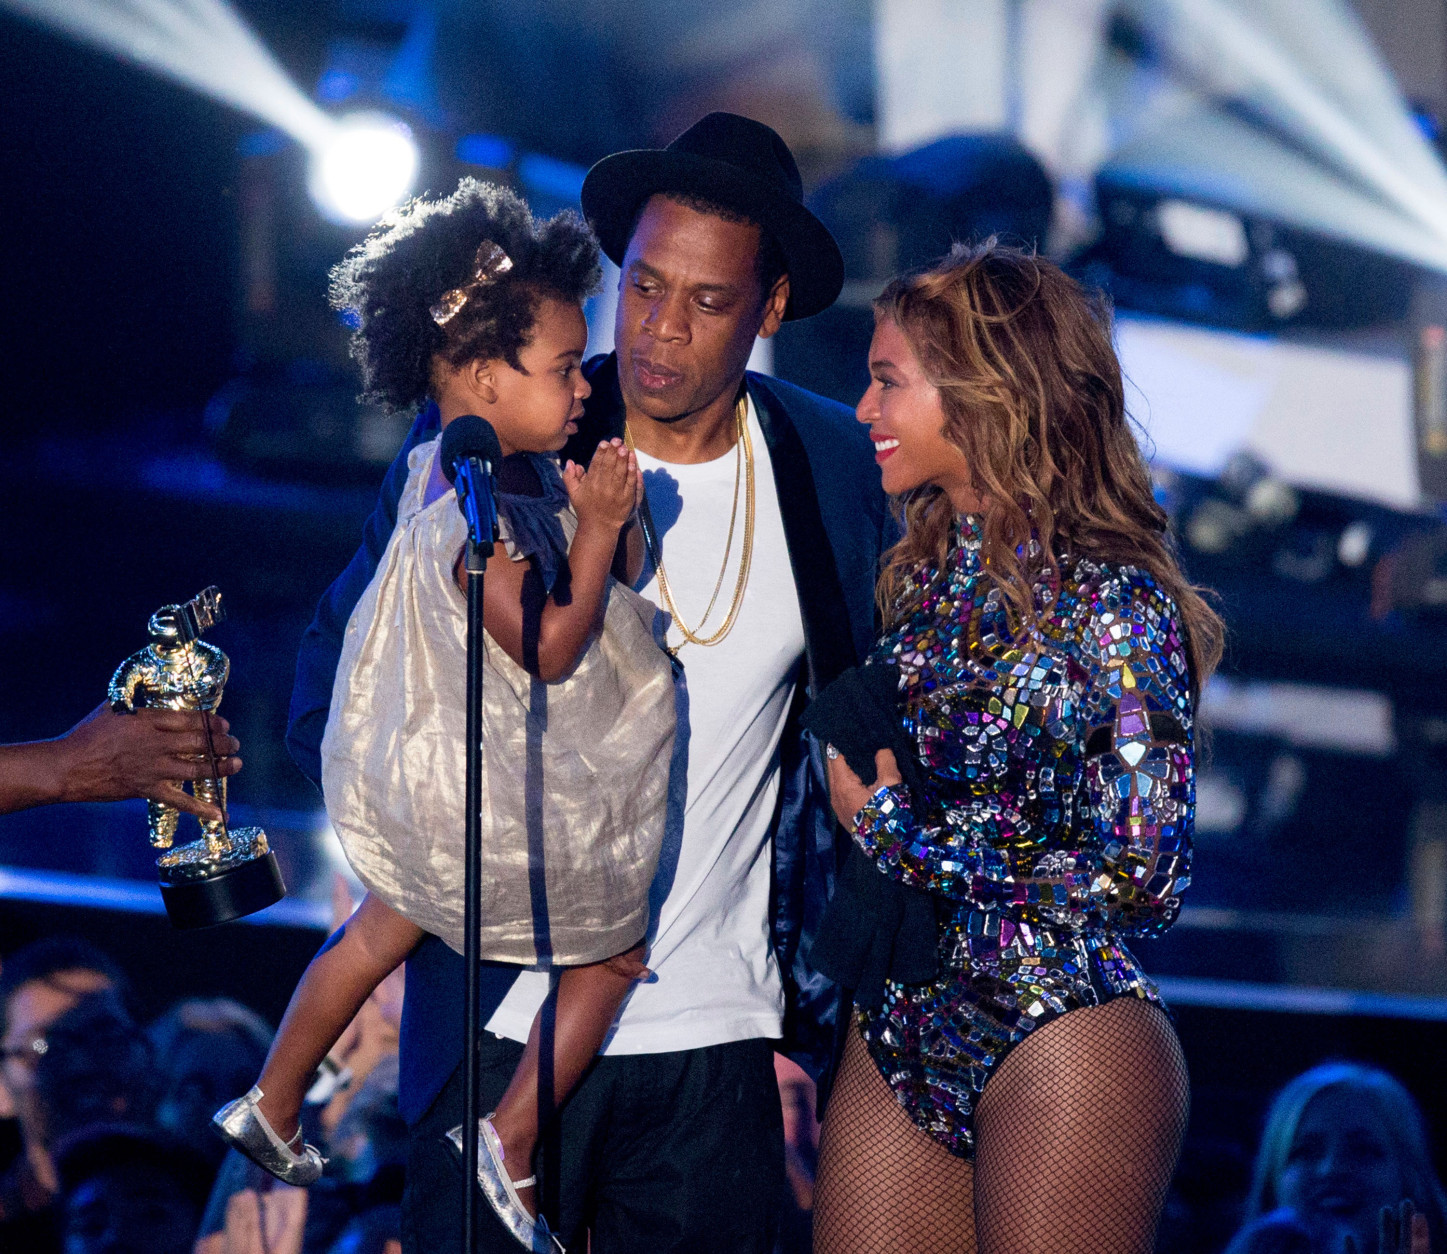 INGLEWOOD, CA - AUGUST 24:  Rapper Jay Z and singer Beyonce with daughter Blue Ivy Carter onstage during the 2014 MTV Video Music Awards at The Forum on August 24, 2014 in Inglewood, California.  (Photo by Mark Davis/Getty Images)